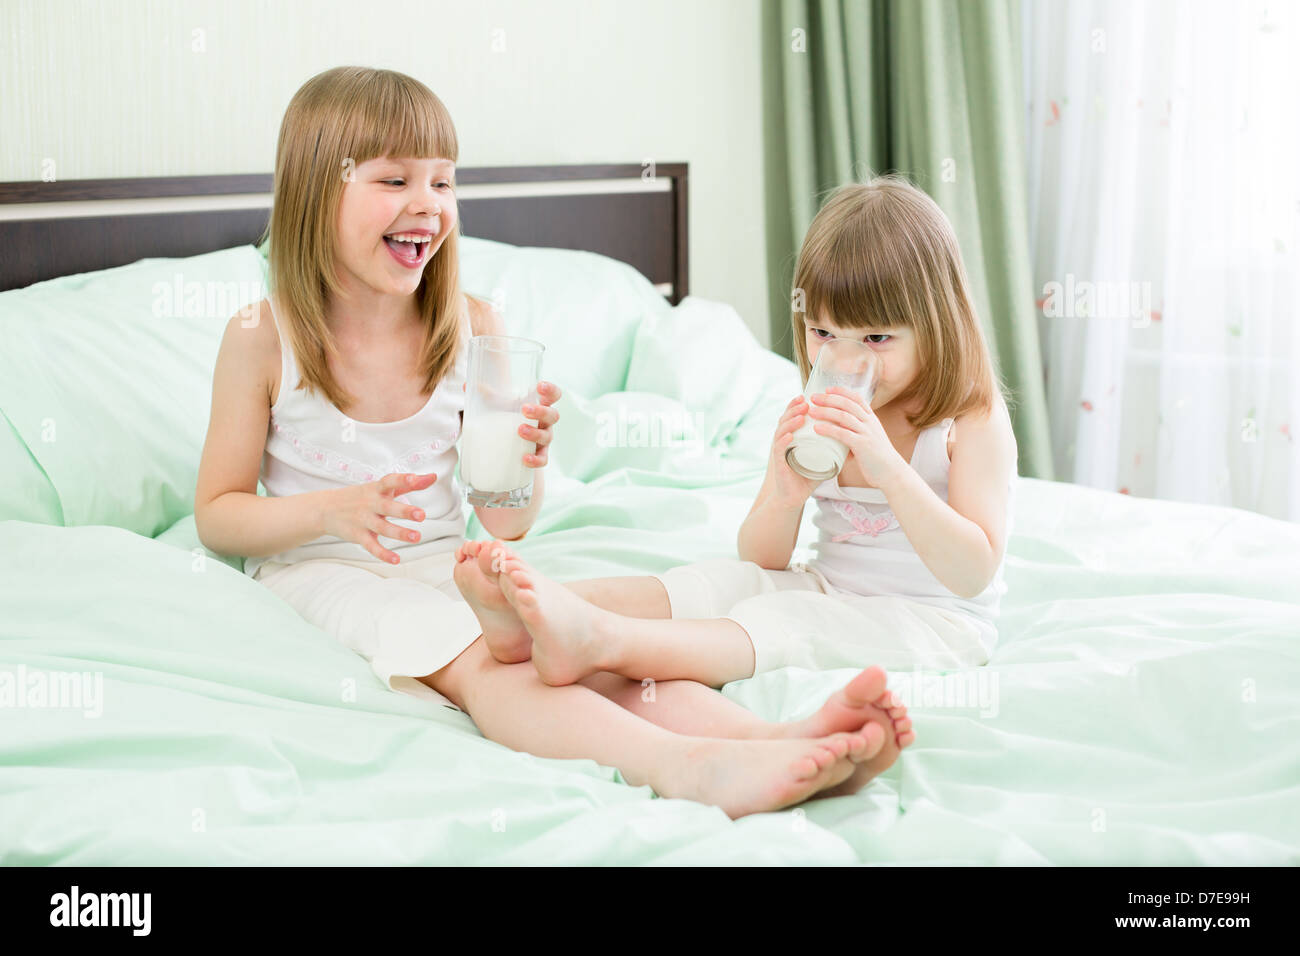 Two little girls drinking milk from glasses on bed Stock Photo